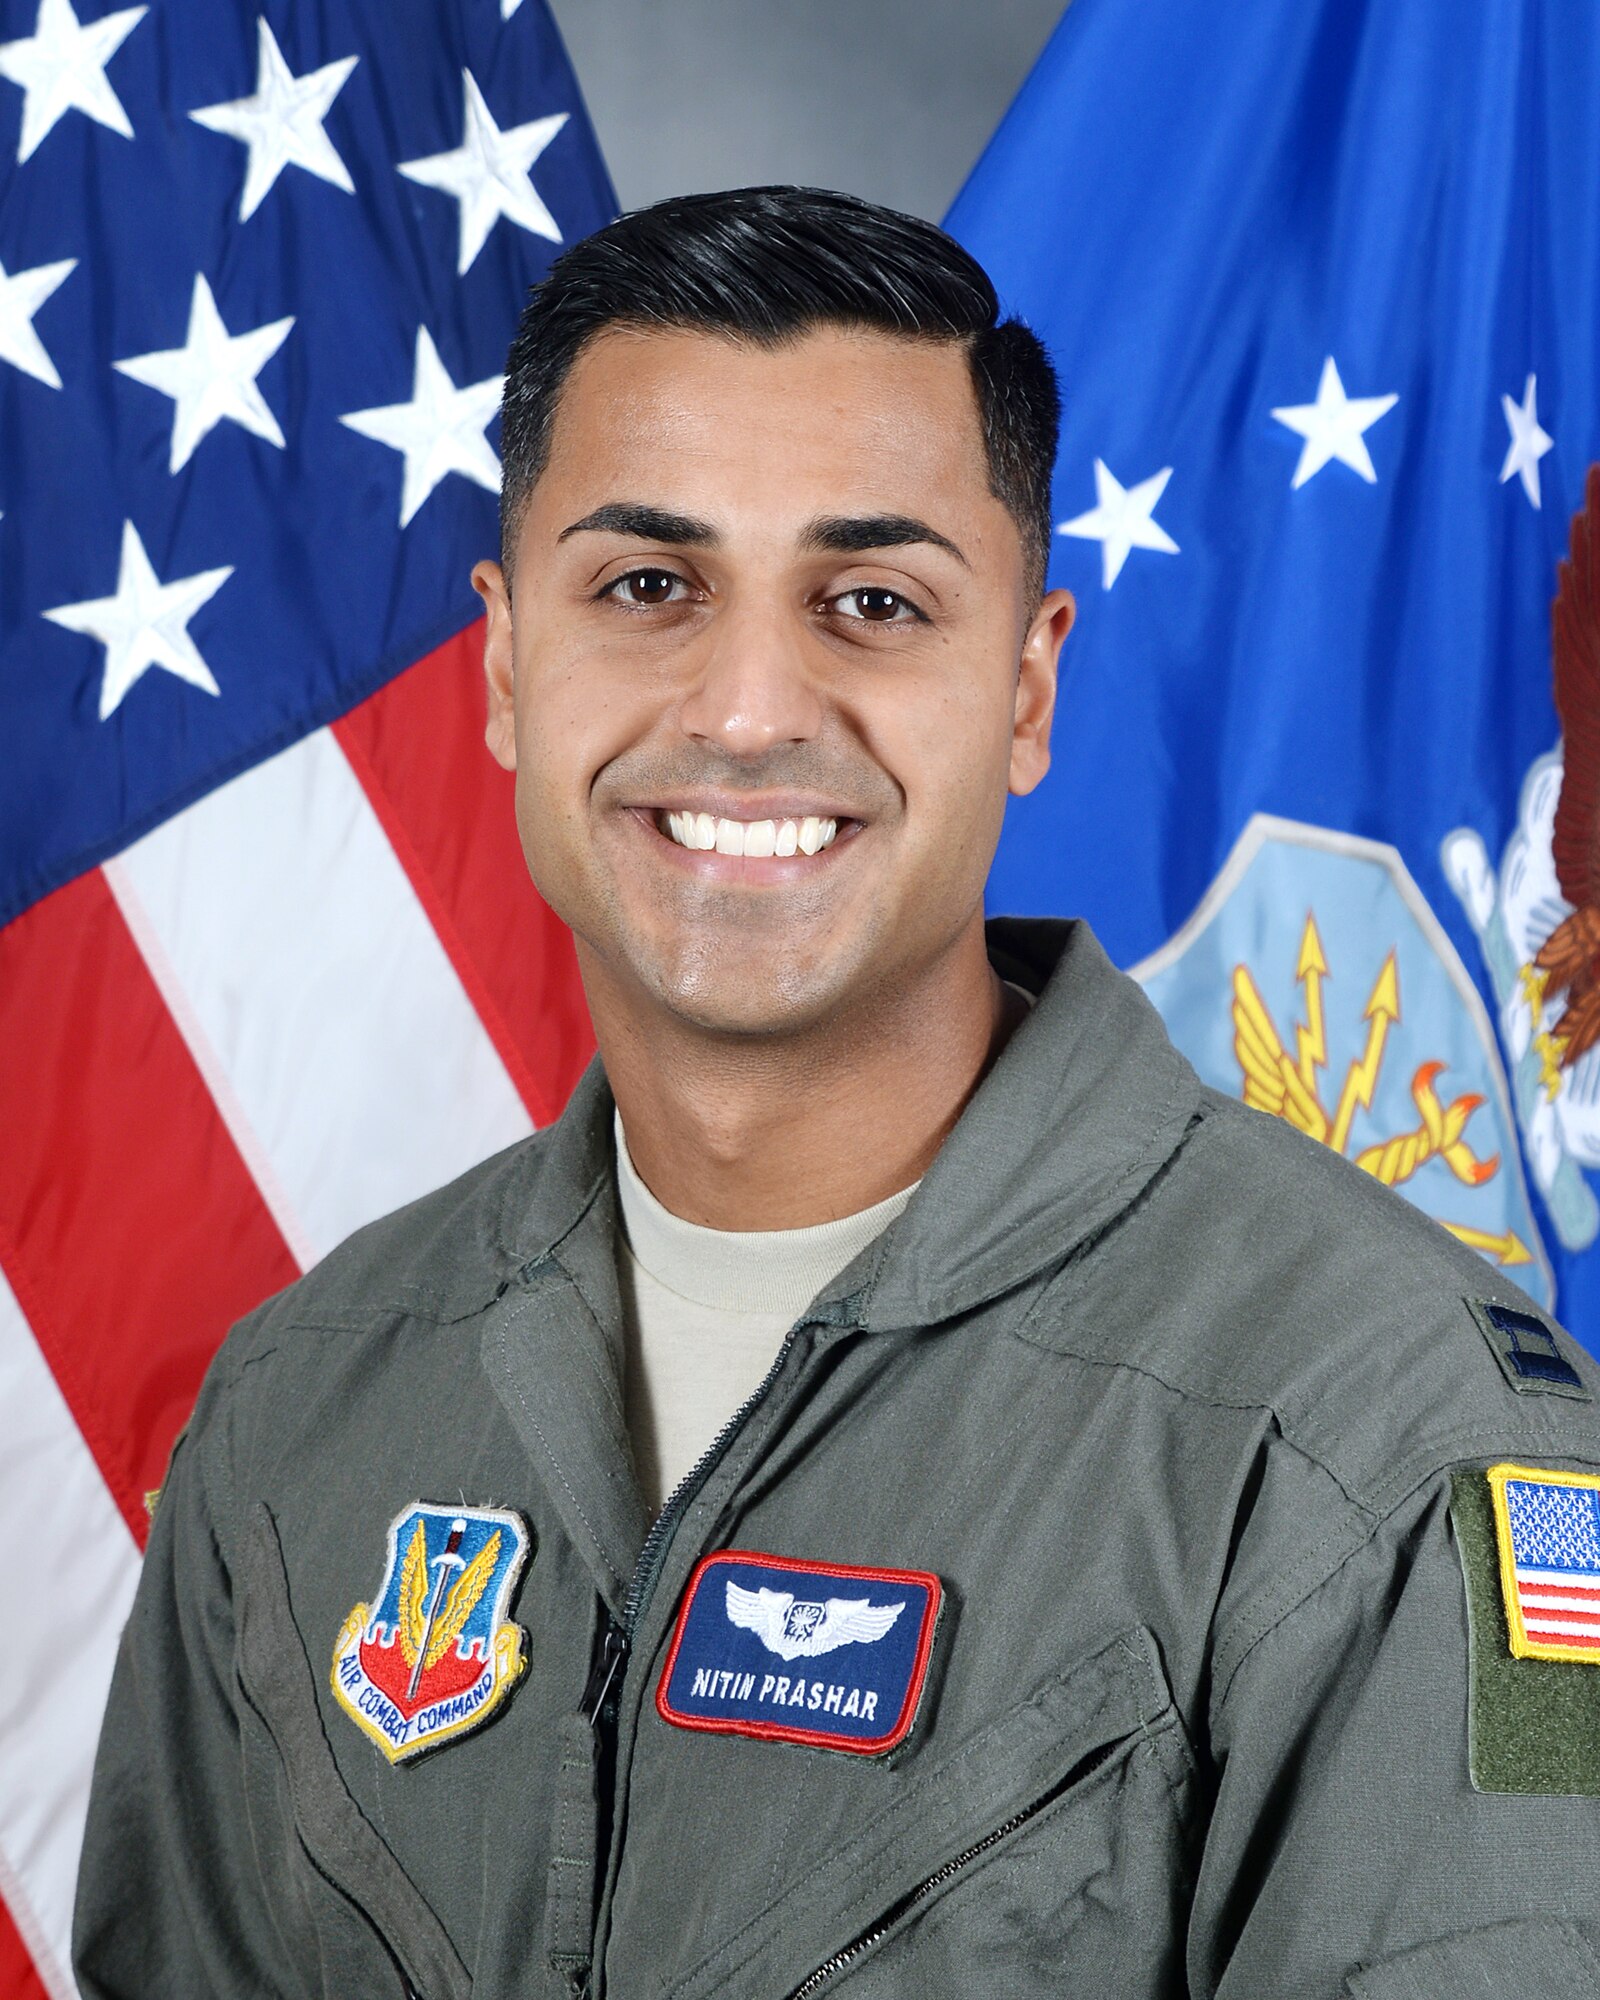 U.S. Air Force Captain Nitin Prashar, 38th Reconnaissance Squadron executive officer, poses for his official photograph August 16, 2017, at Offutt Air Force Base, Nebraska. Prashar created the Trail Blazer Scholarship which is offered to students who actively try to be a positive force for change in his home town of Rockford, Illinois, and in Omaha, Nebraska. (U.S. Air Force photo by D.P. Heard)